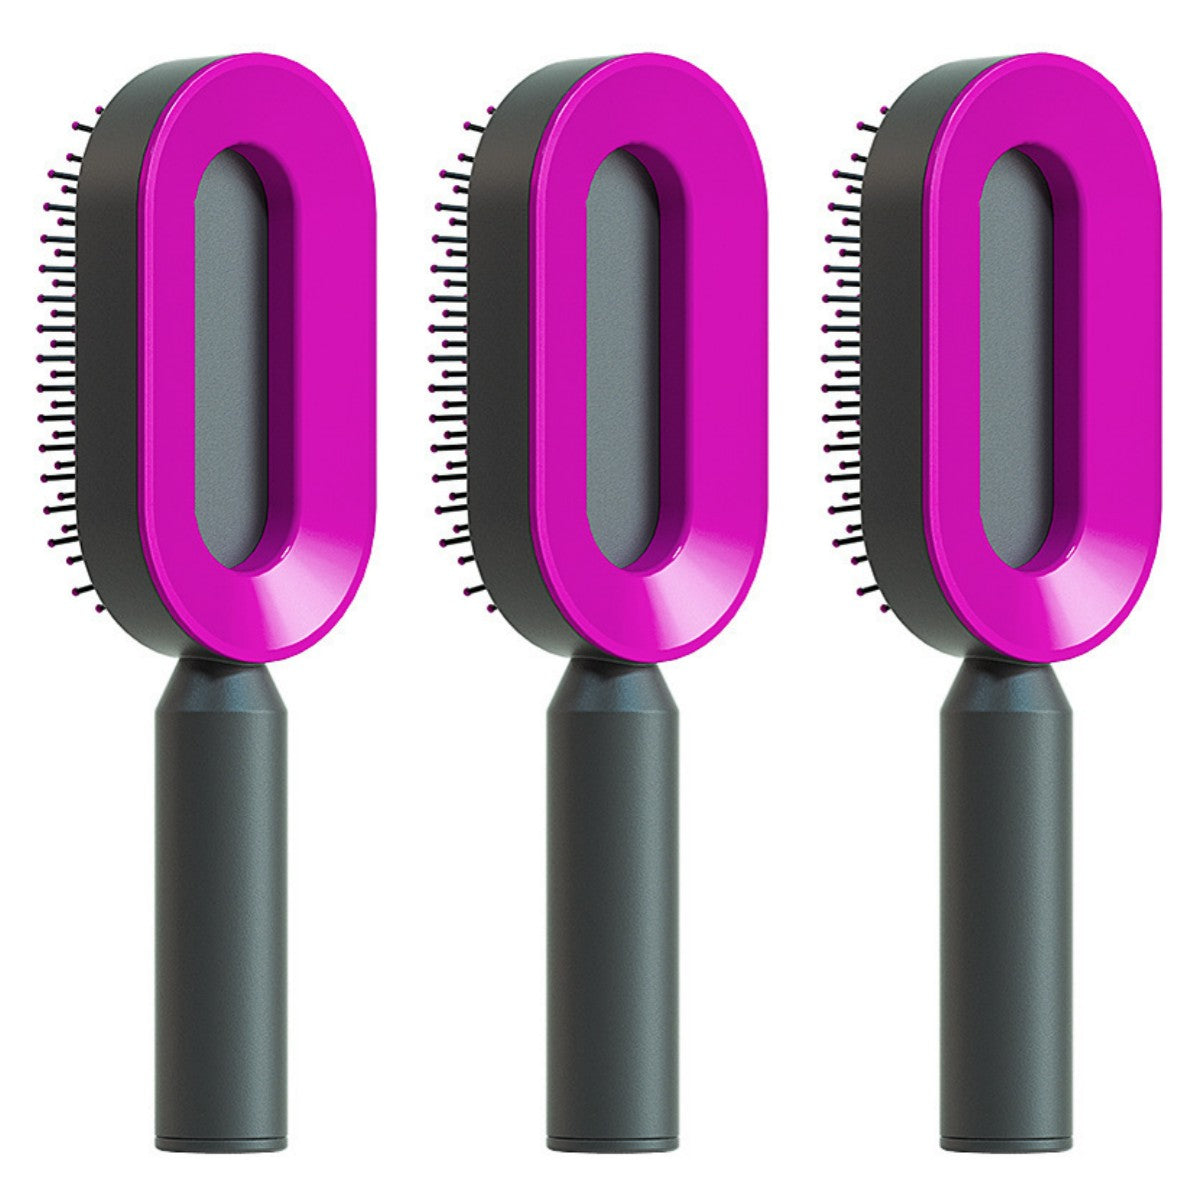 Self Cleaning Hair Brush For Women One-key Cleaning Hair Loss Airbag Massage Scalp Comb Anti-Static Hairbrush Set S